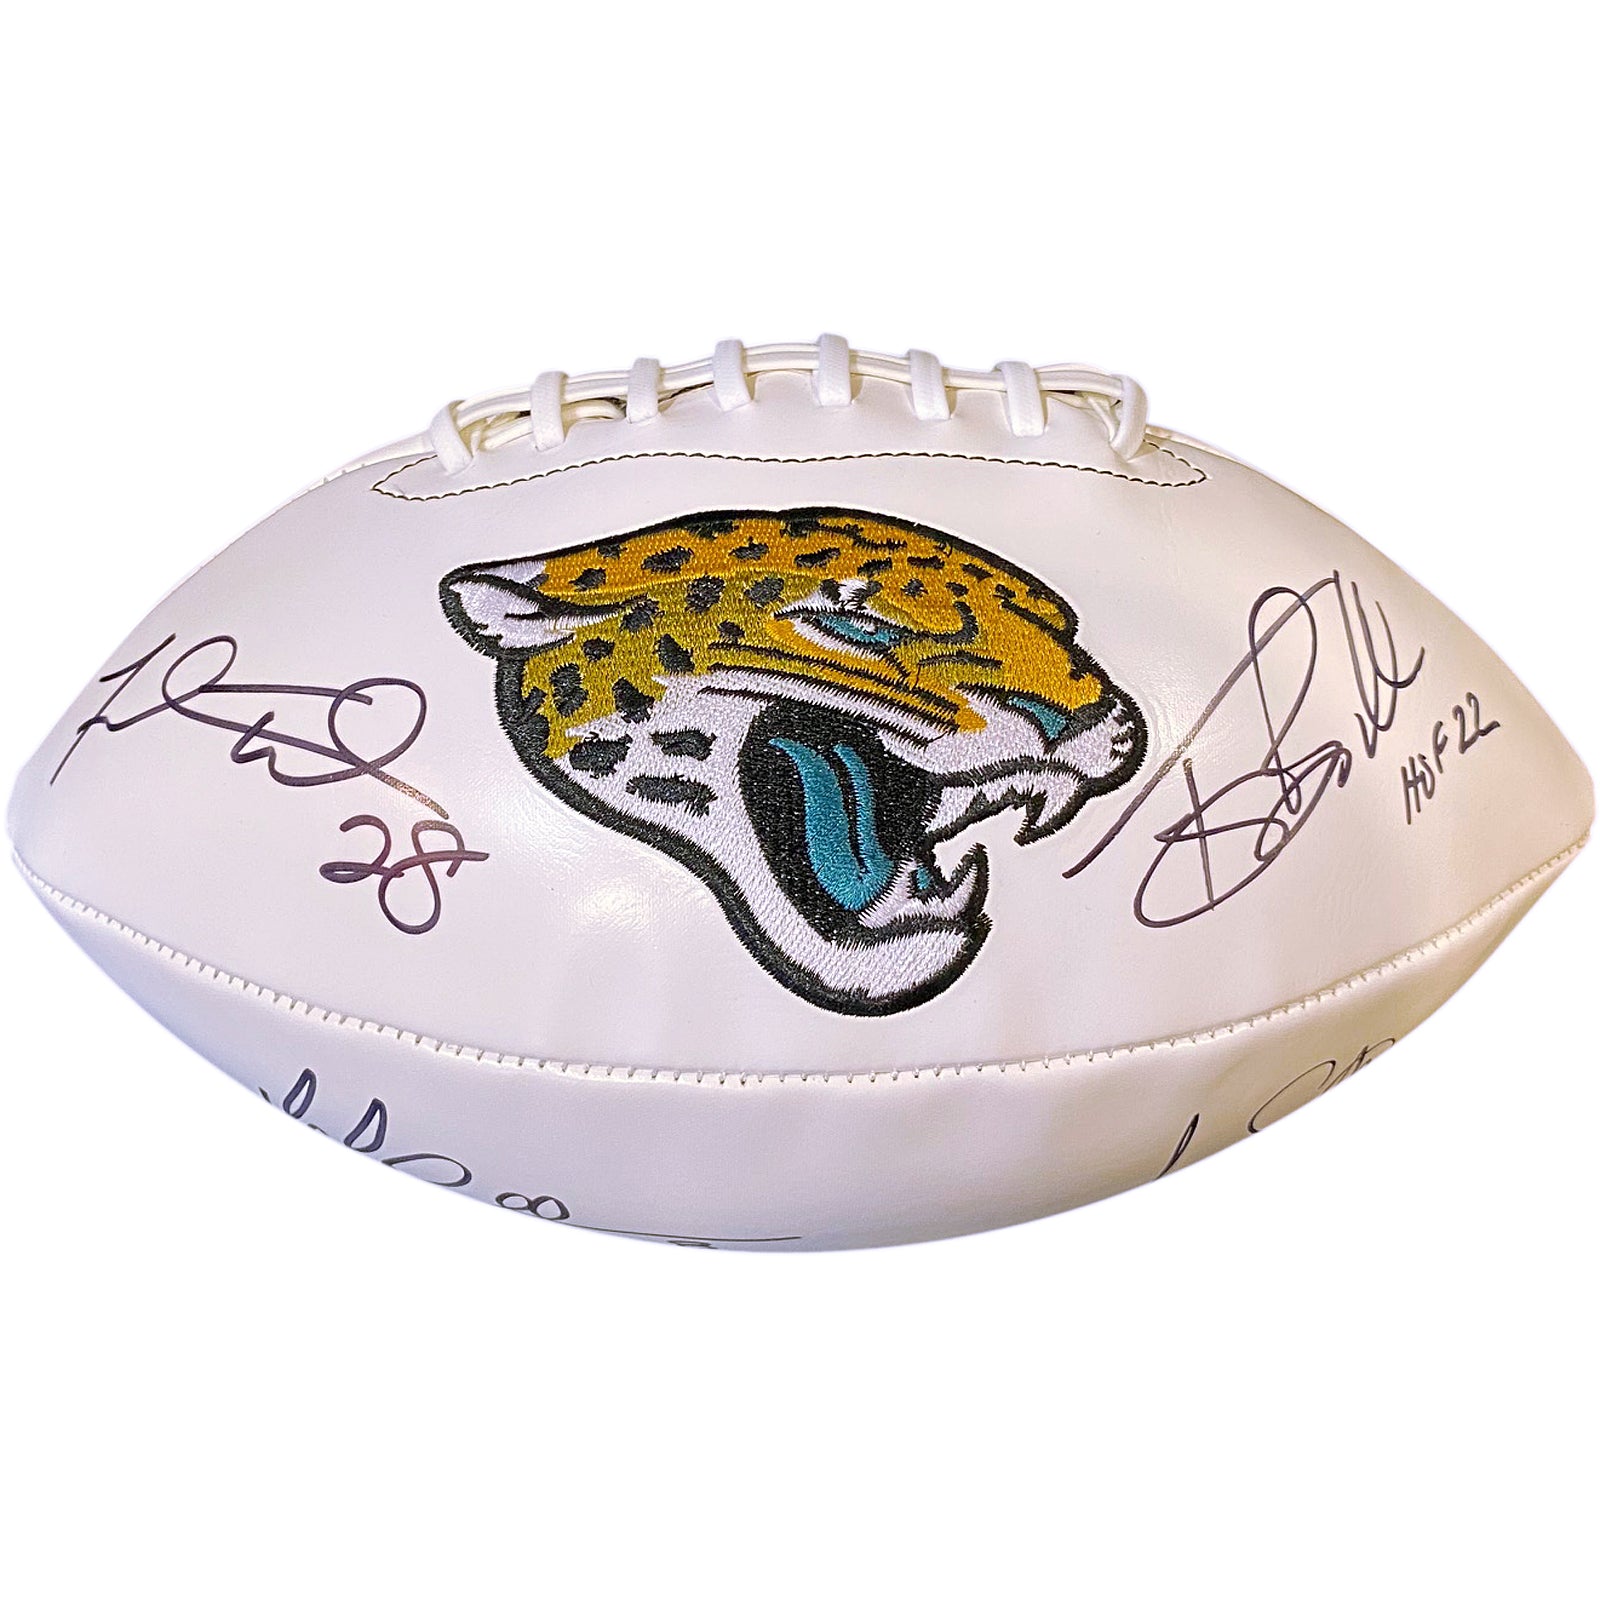 Tony Boselli, Mark Brunell, Jimmy Smith And Fred Taylor Autographed Jacksonville Jaguars Logo Football - Pride of the Jaguars